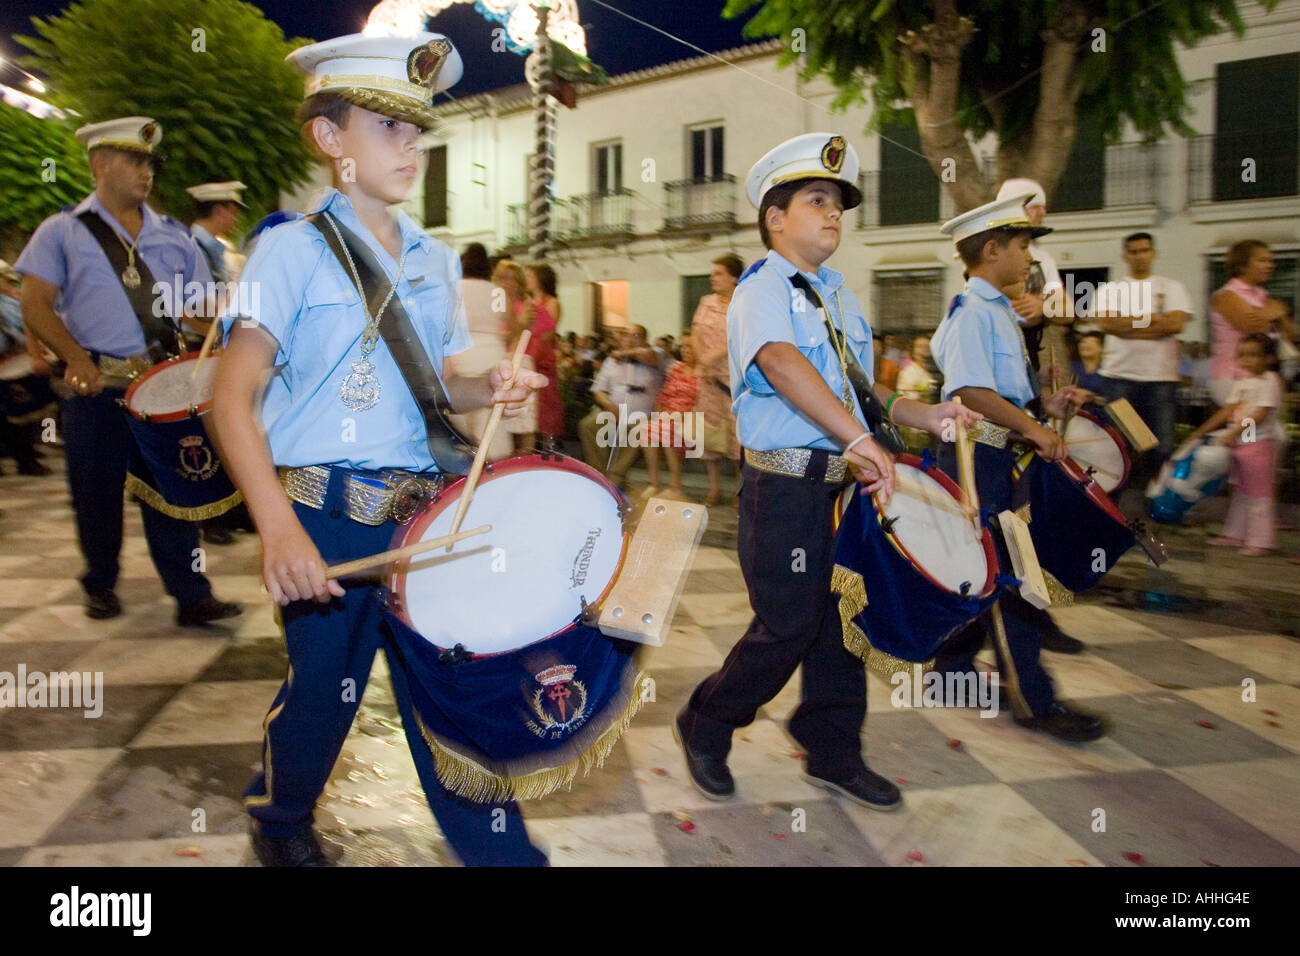 Drummer kids playing in a brass band during a procession, Aznalcazar, Seville, Spain, July 2005 Stock Photo